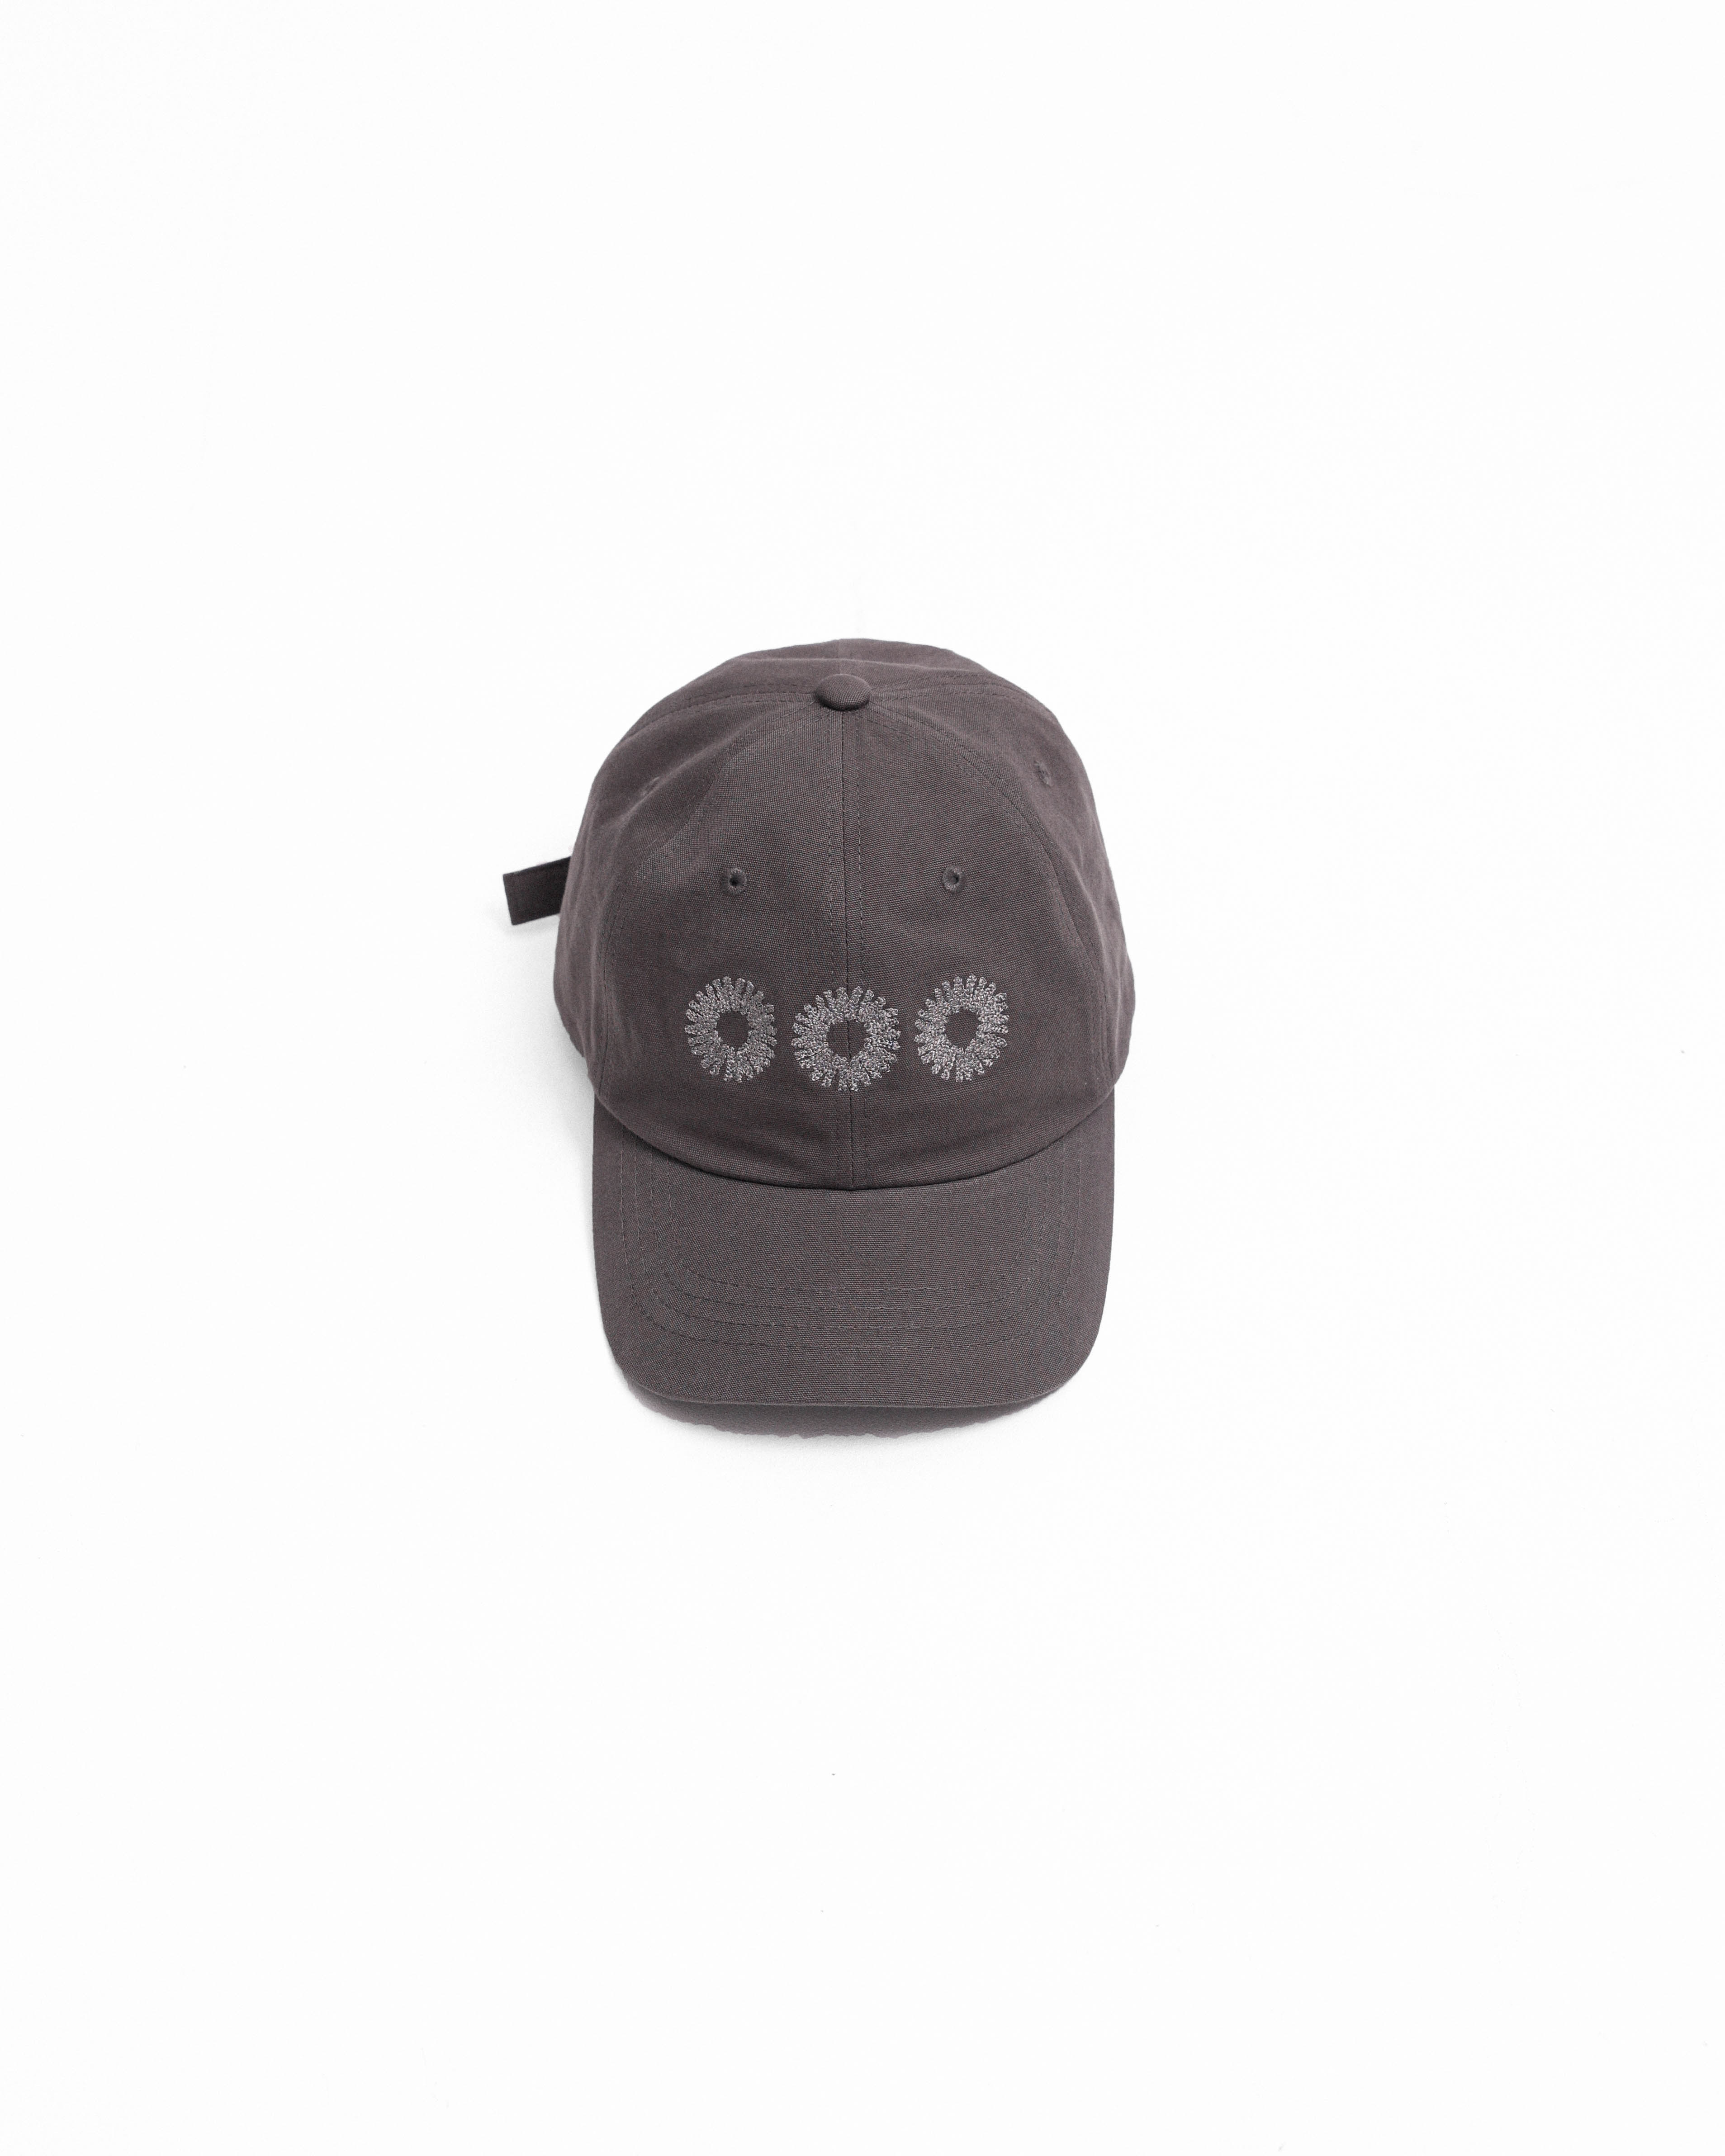 LOGO ARCHIVE CAP (FADED OLIVE)